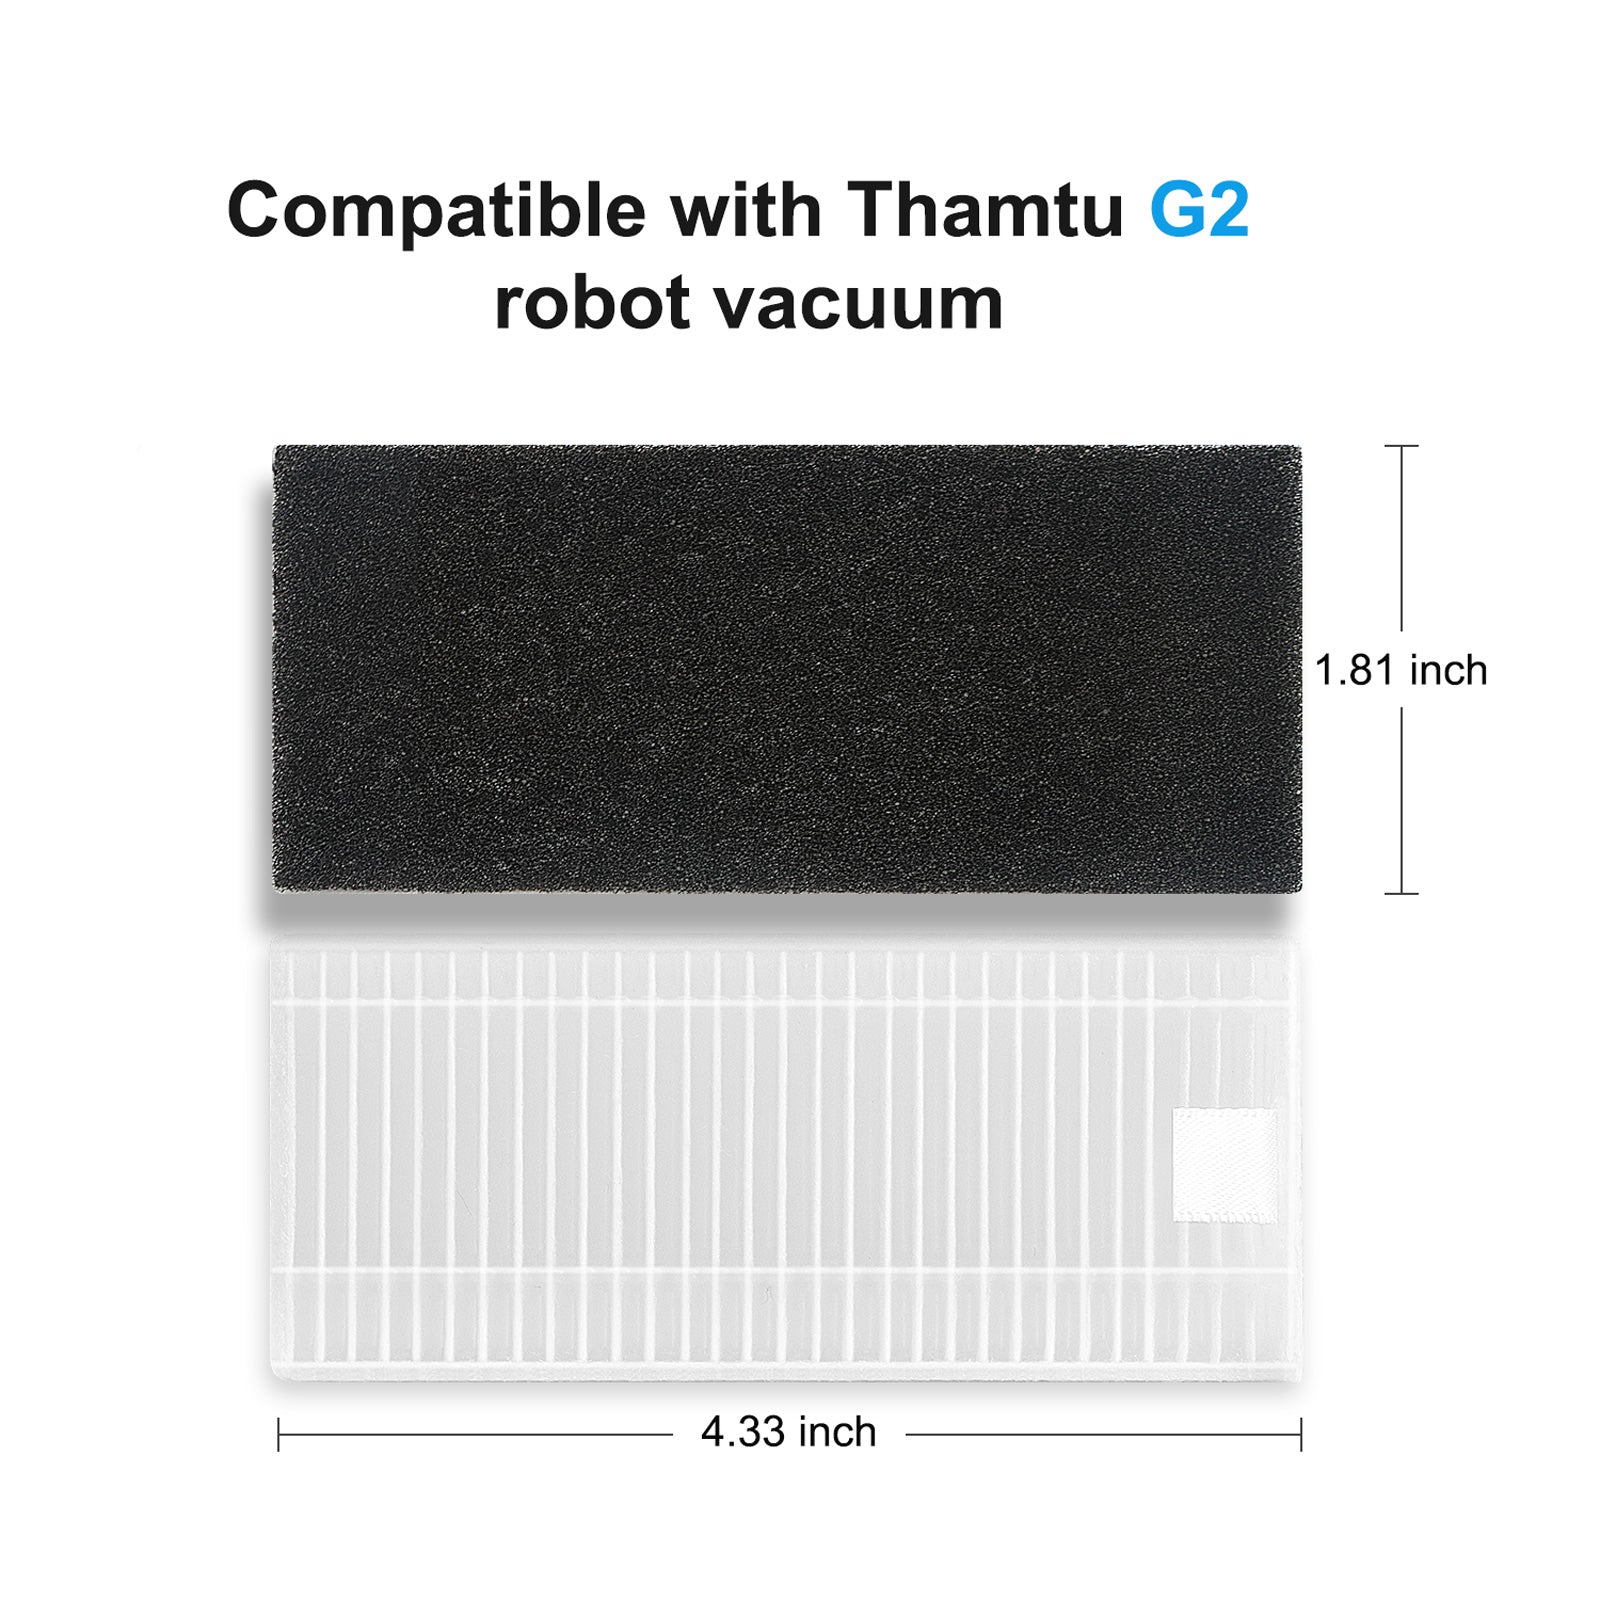 Robot Vacuum Replacement Filter For Thamtu G2, 6 Filters and 6 Sponges Included